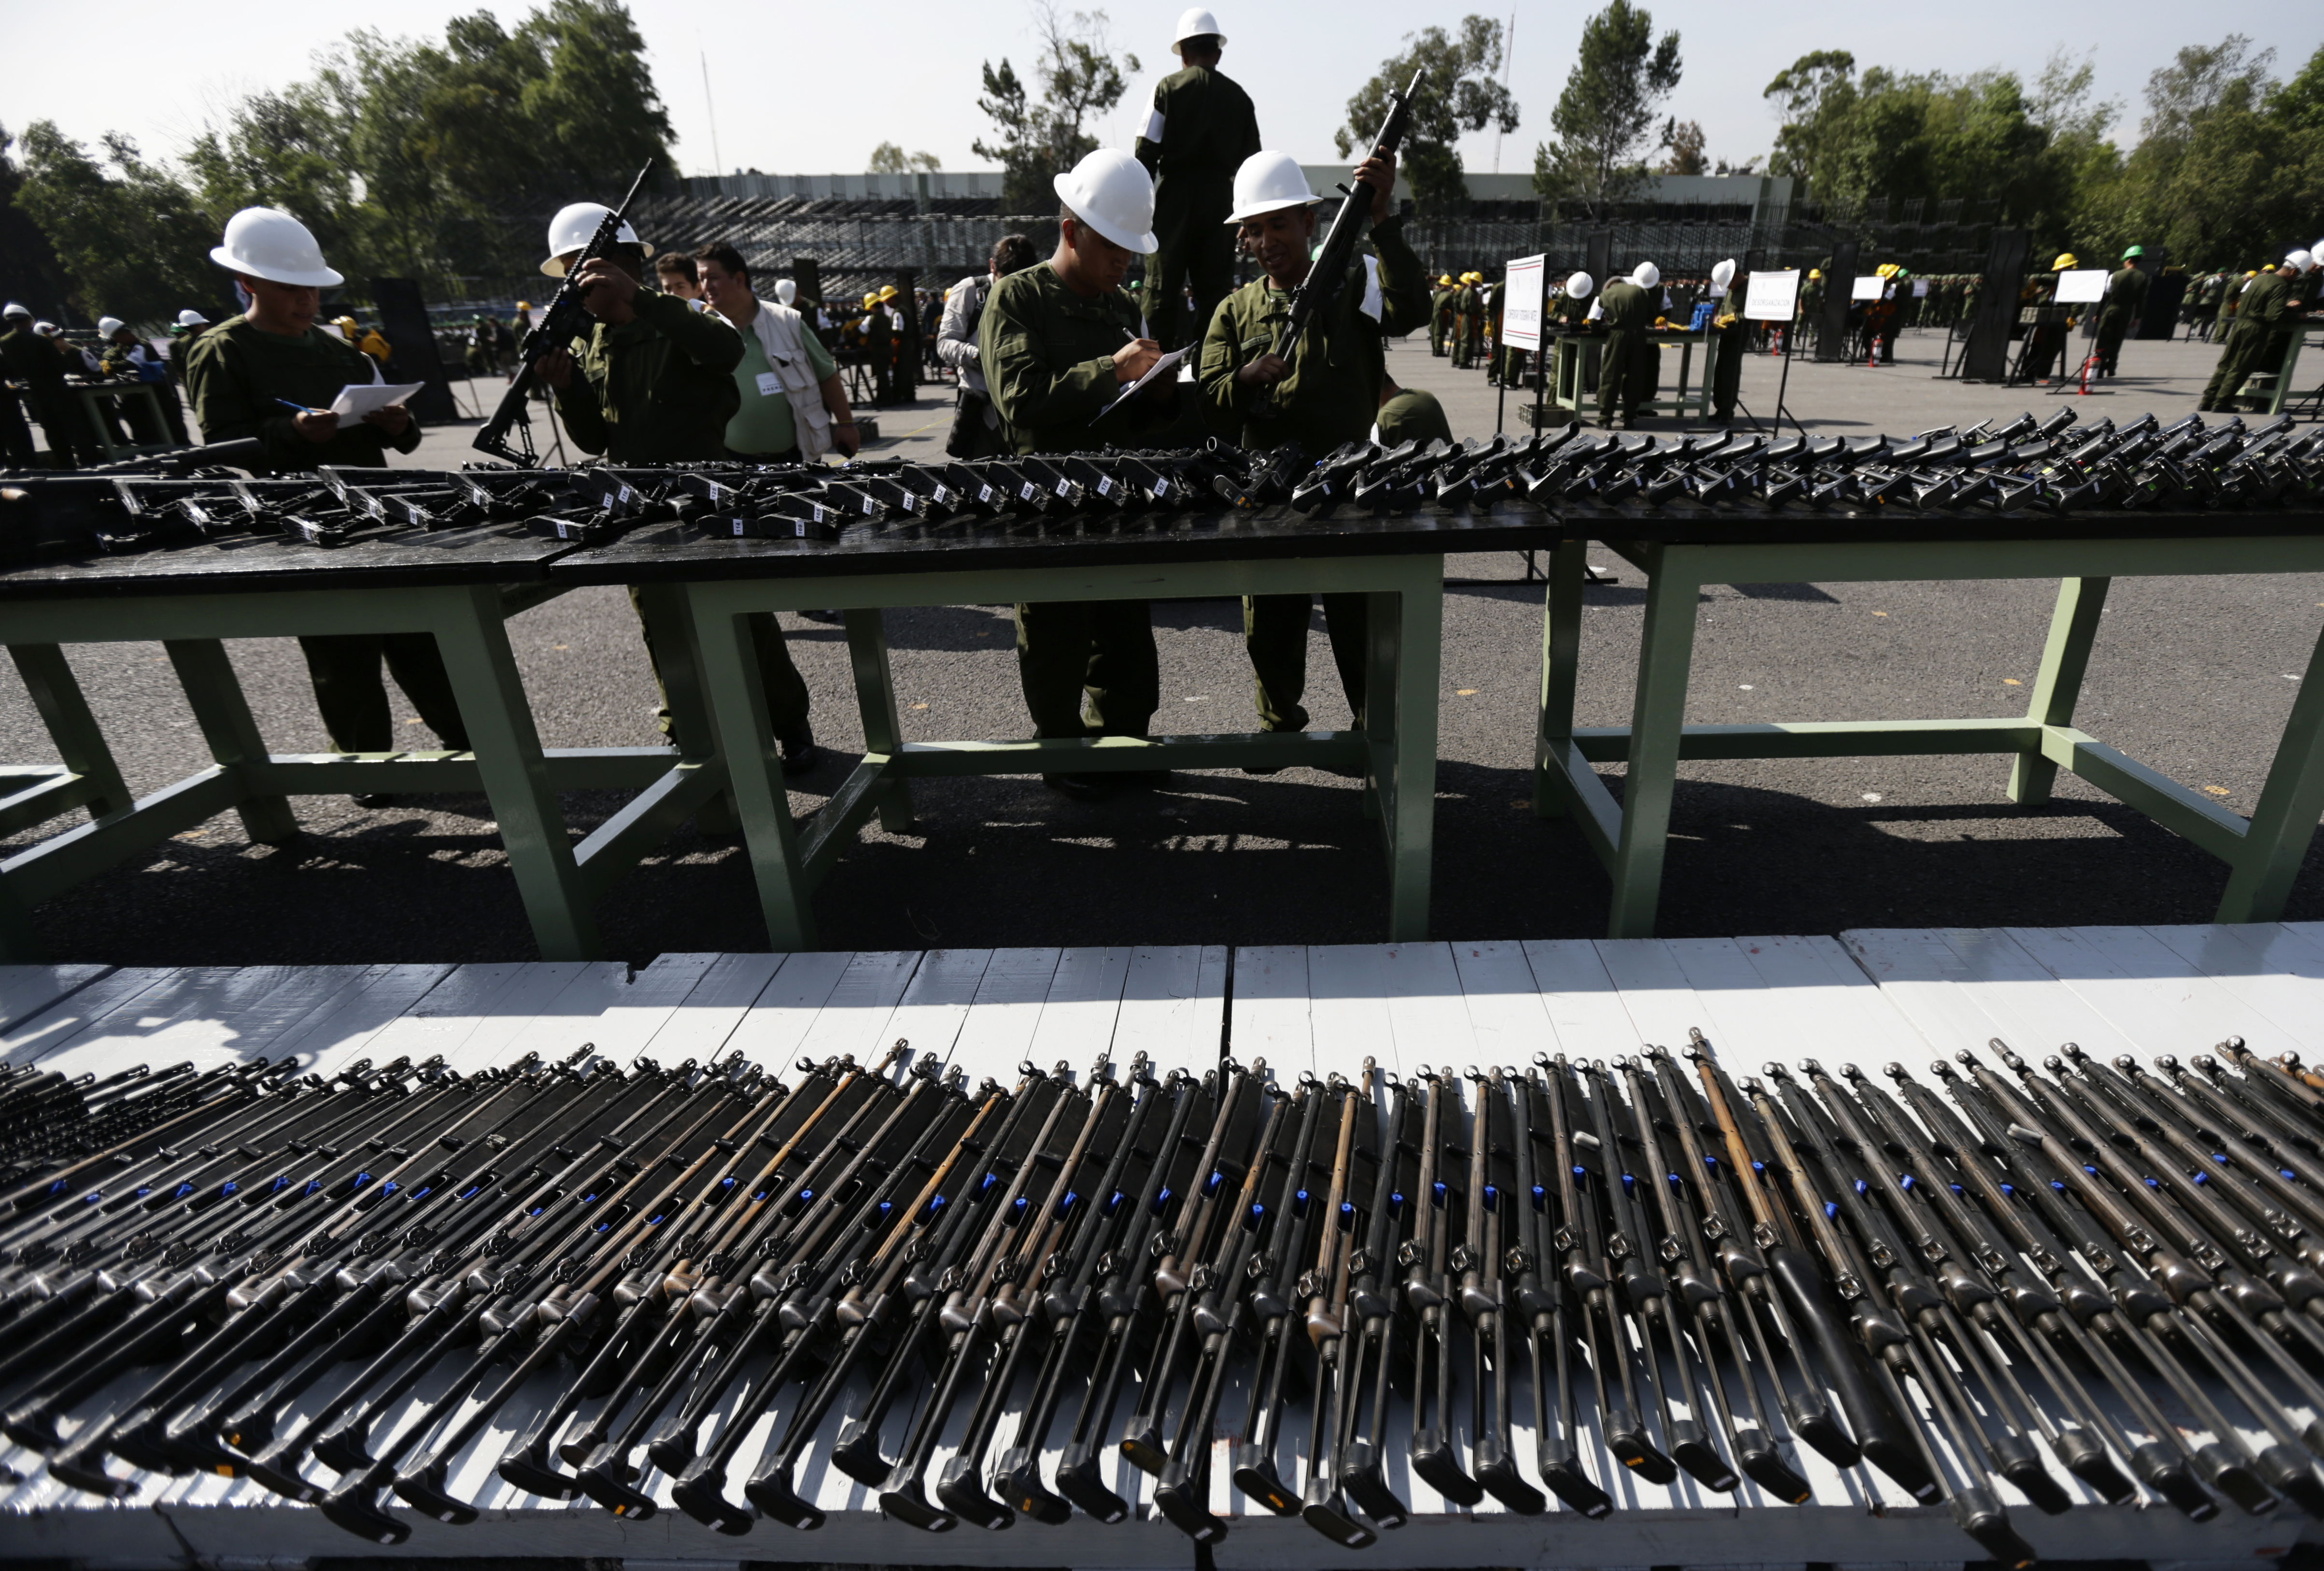 Weapons slated for destruction are displayed by the Mexican Army, in Mexico City, Tuesday, Aug. 1, 2017. The weapons were confiscated from organized crime and civilians who turned them in. (AP Photo/Marco Ugarte)